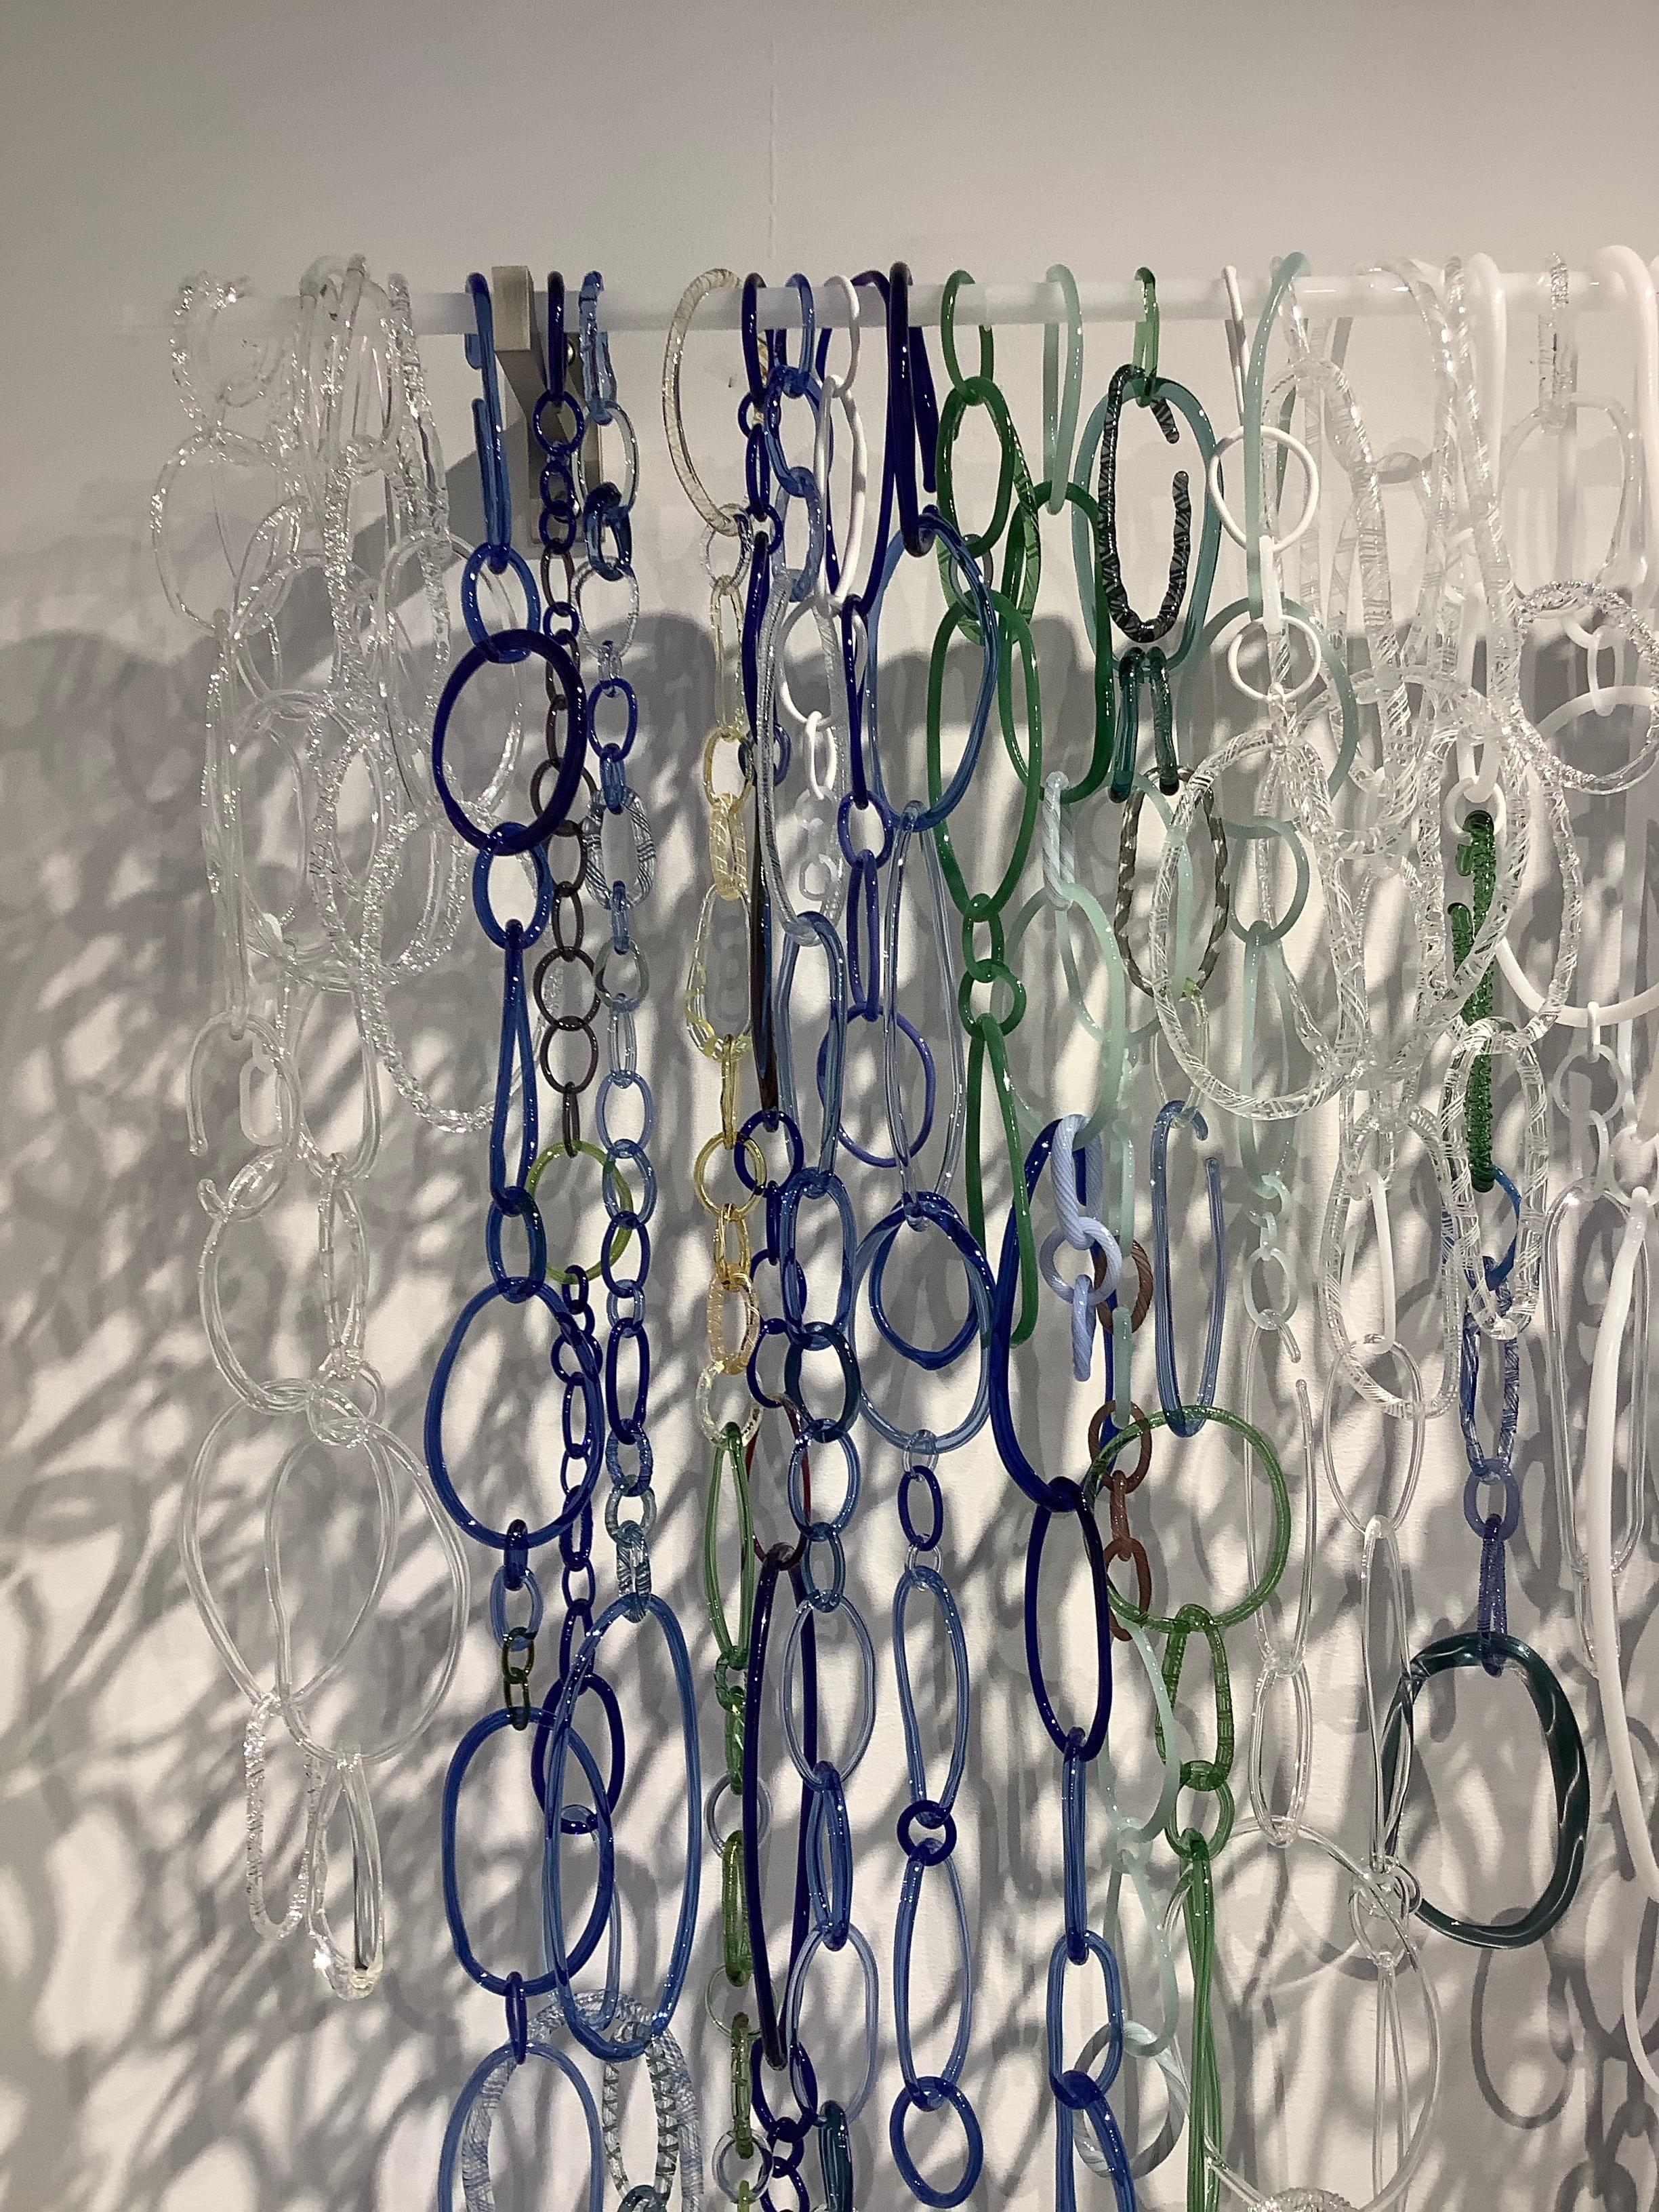 Frozen II, Hanging Sculpture of Torch-Worked Glass in White, Blue, Green Loops - Gray Abstract Sculpture by David Licata